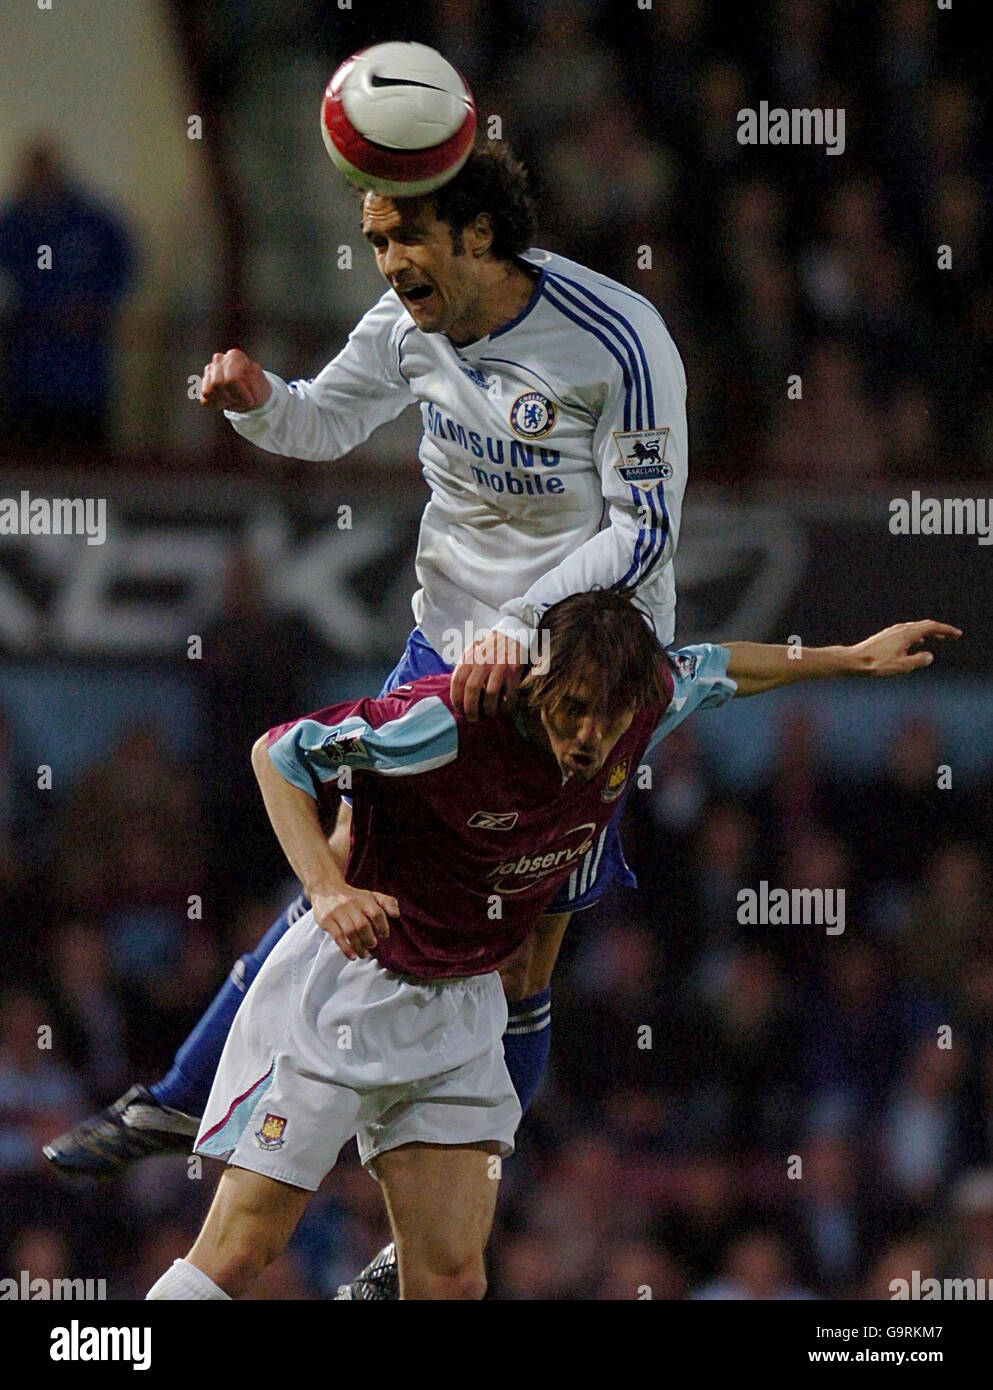 Chelsea's Ricardo Carvalho (top) climbs high to beat West Ham United's Yossi Benayoun to the ball during the FA Barclays Premiership match at Upton Park, London. Stock Photo